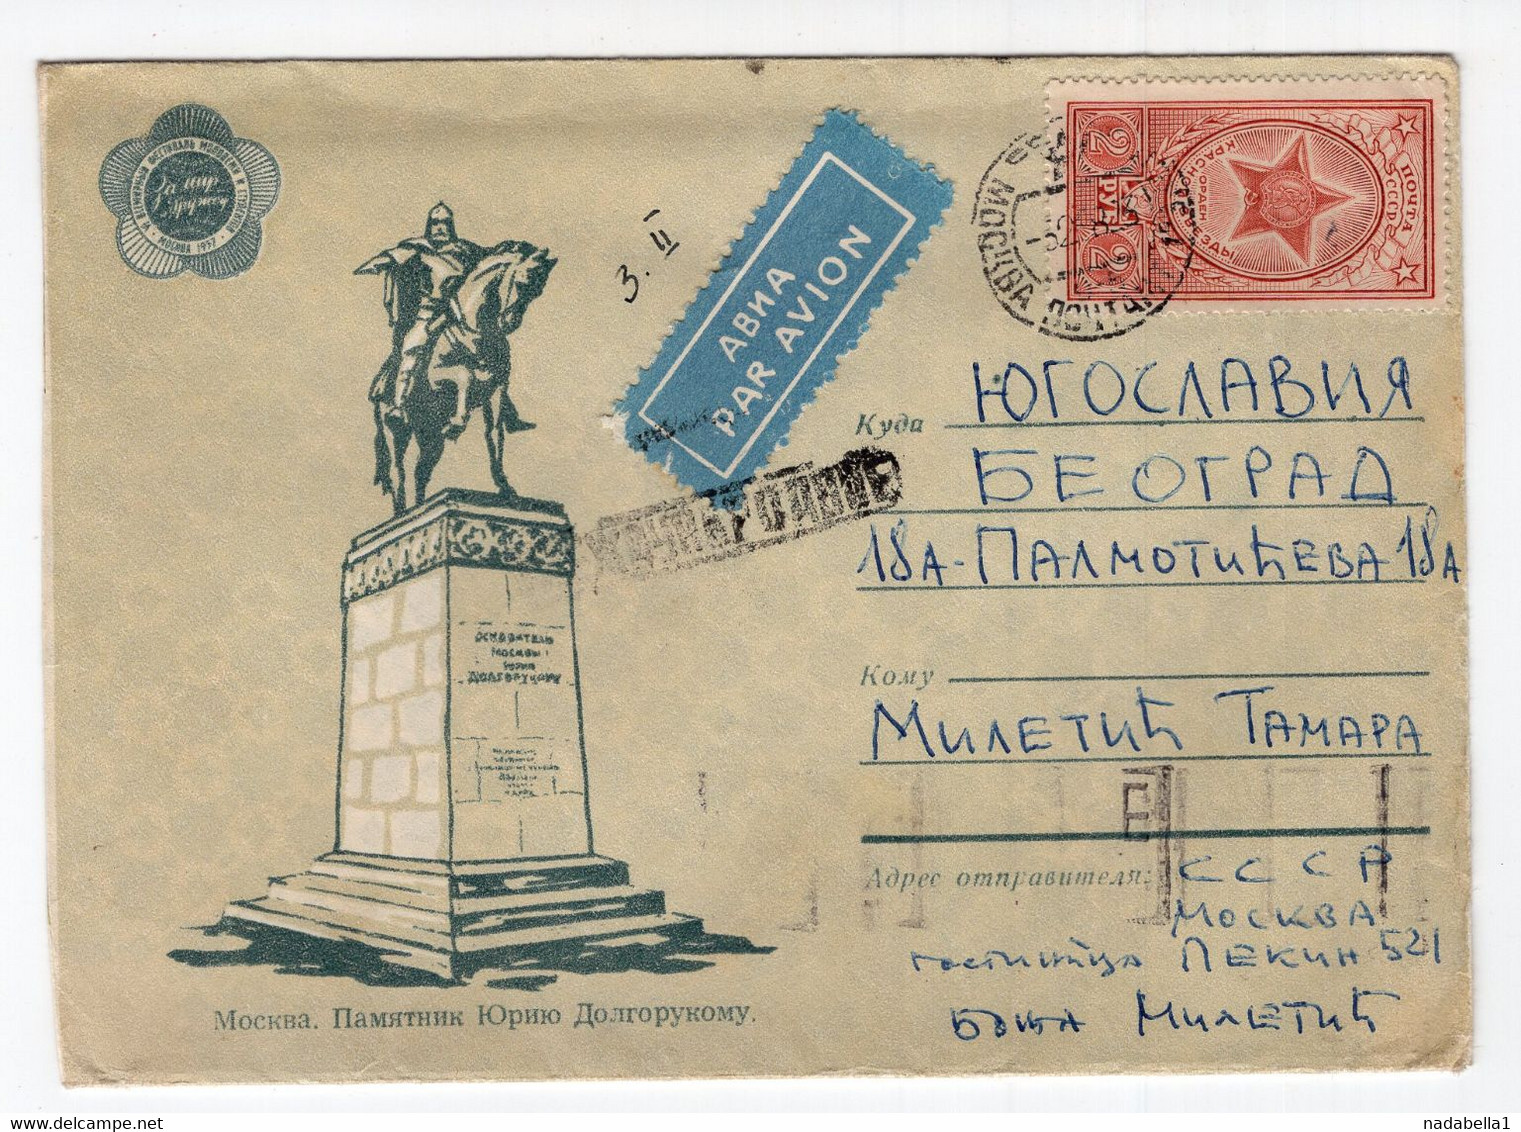 1958 RUSSIA,MOSCOW TO BELGRADE,YUGOSLAVIA,AIRMAIL,2 R STAMP,RED MEDAL,YURY DOLGORUKY,ILLUSTRATED COVER,USED - Briefe U. Dokumente